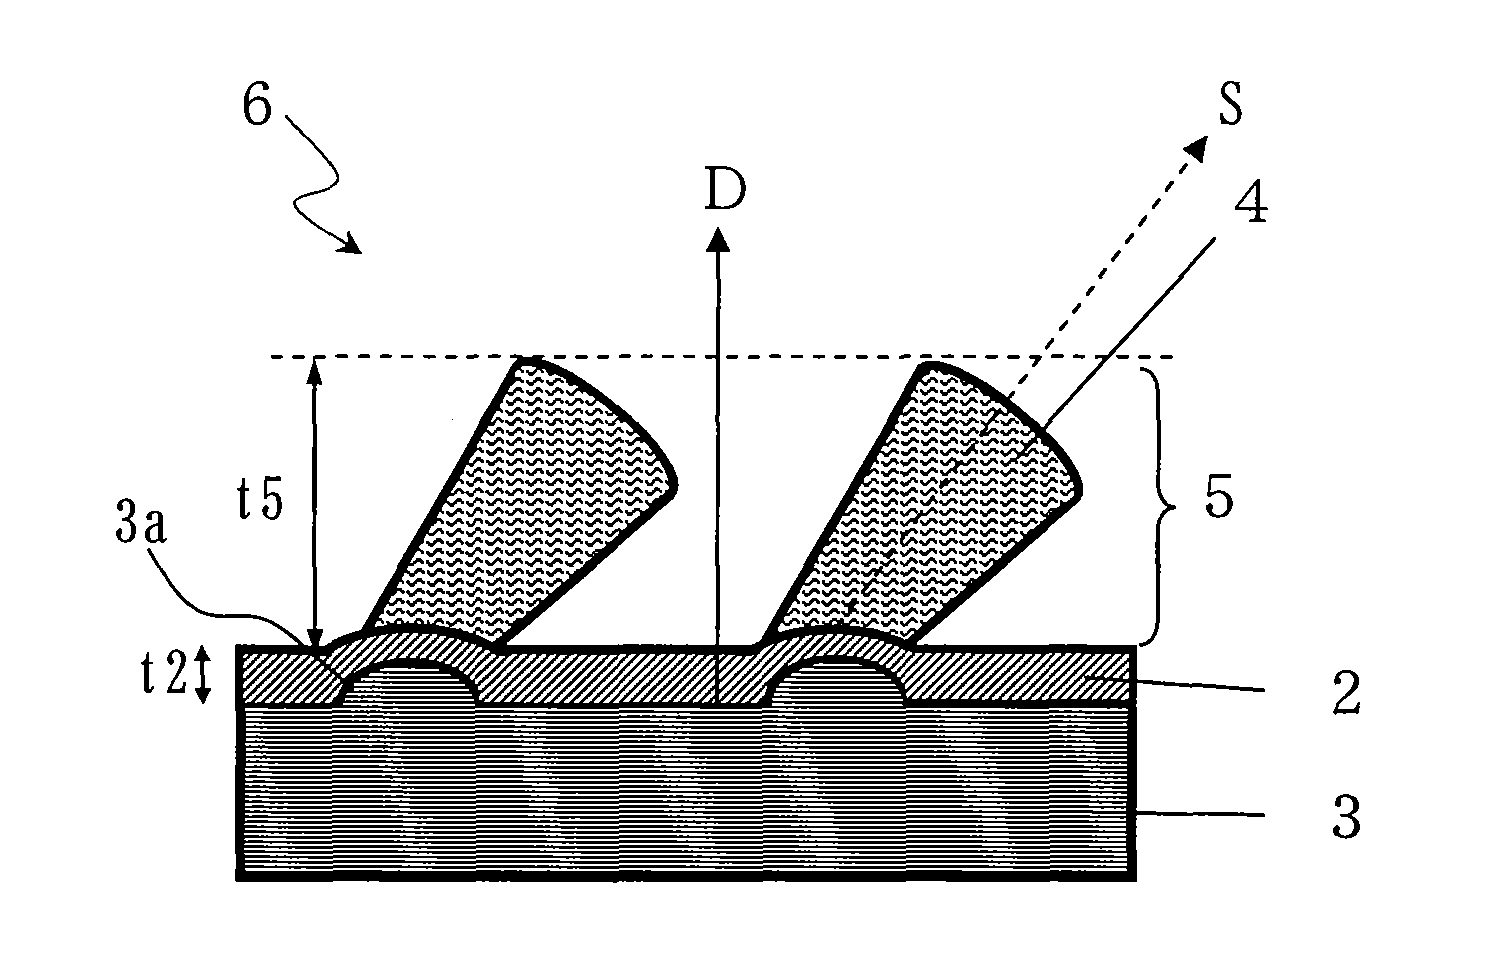 Electrode for nonaqueous electrolyte secondary battery, method for producing same, and nonaqueous electrolyte secondary battery comprising such electrode for nonaqueous electrolyte secondary battery